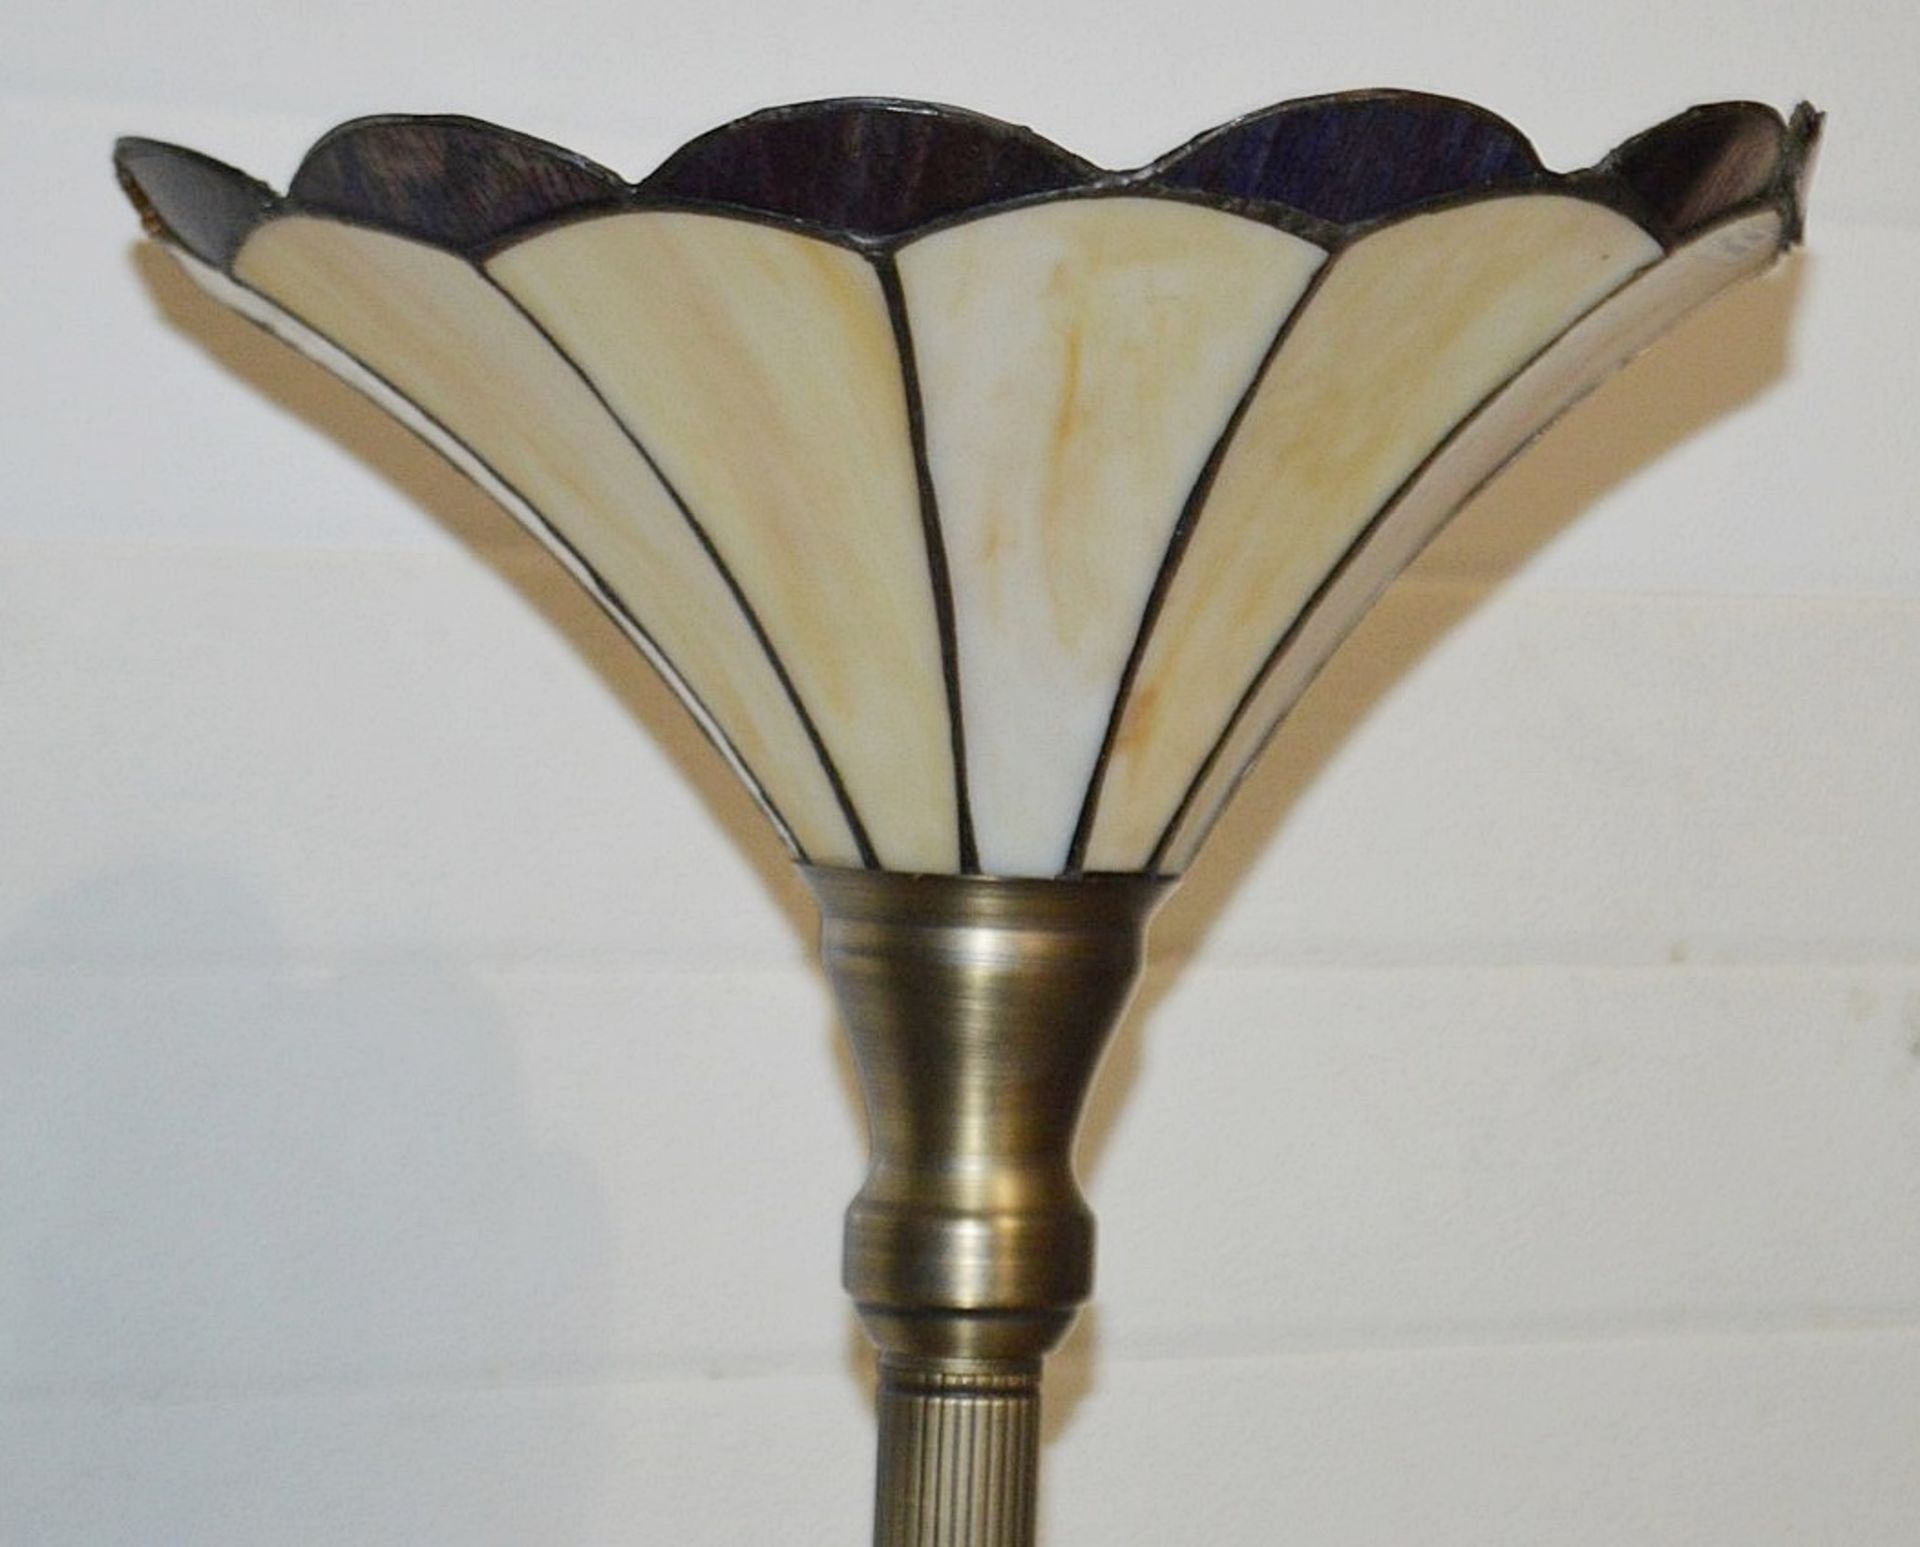 1 x Floorstanding Tiffany-style Lamp With A Glass Uplighter Shade And An Aged Bronze Finish - From - Image 7 of 10